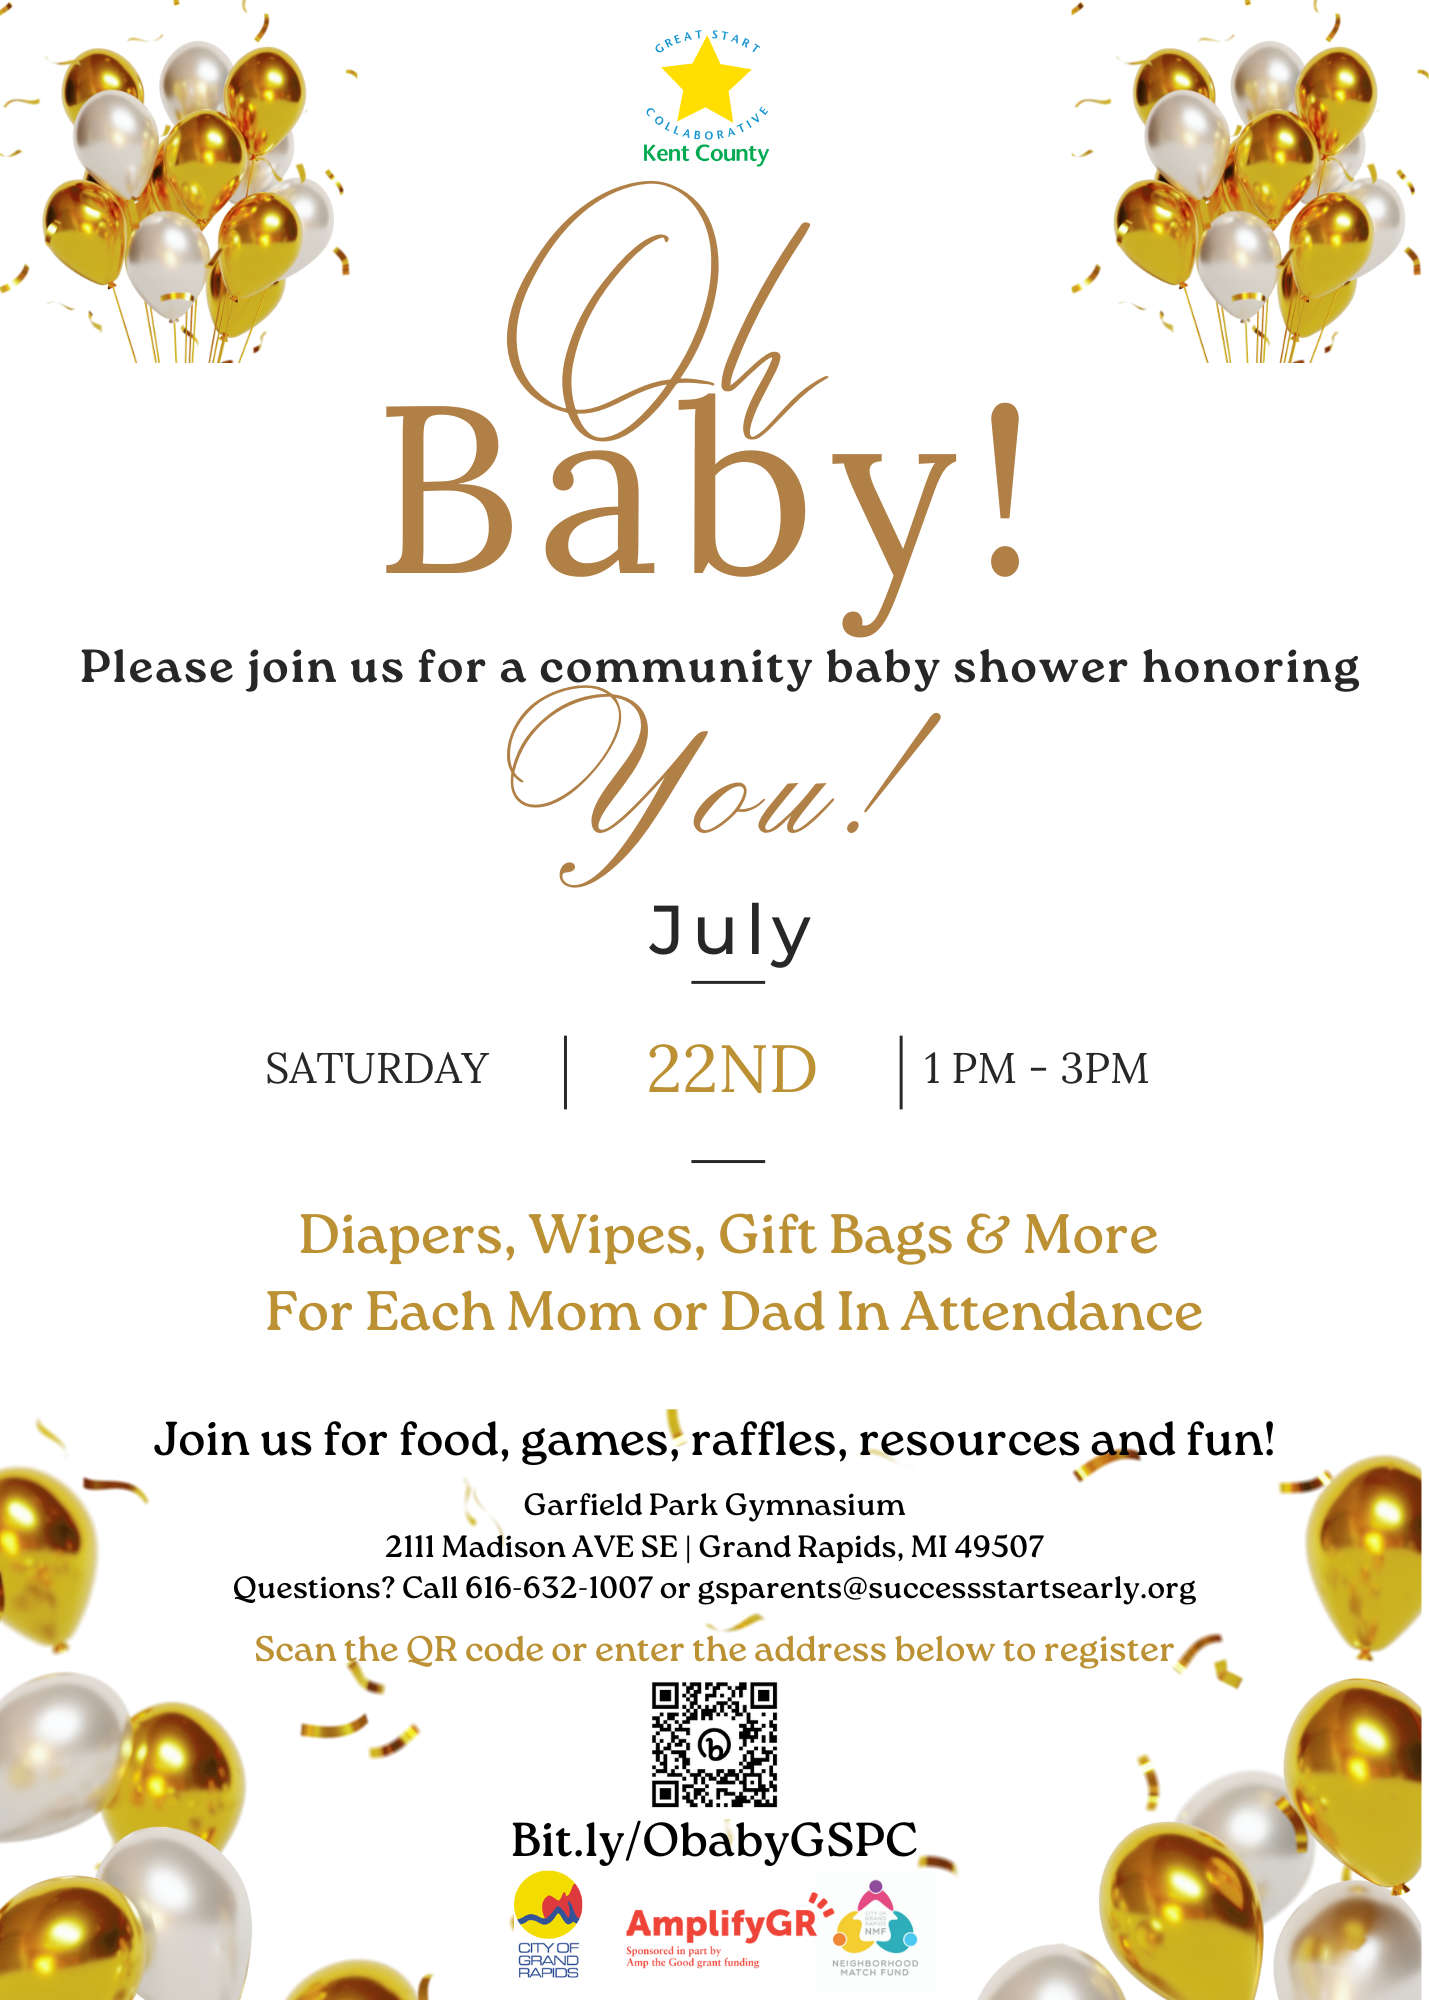 Oh Baby! Community Baby Shower - WCSG